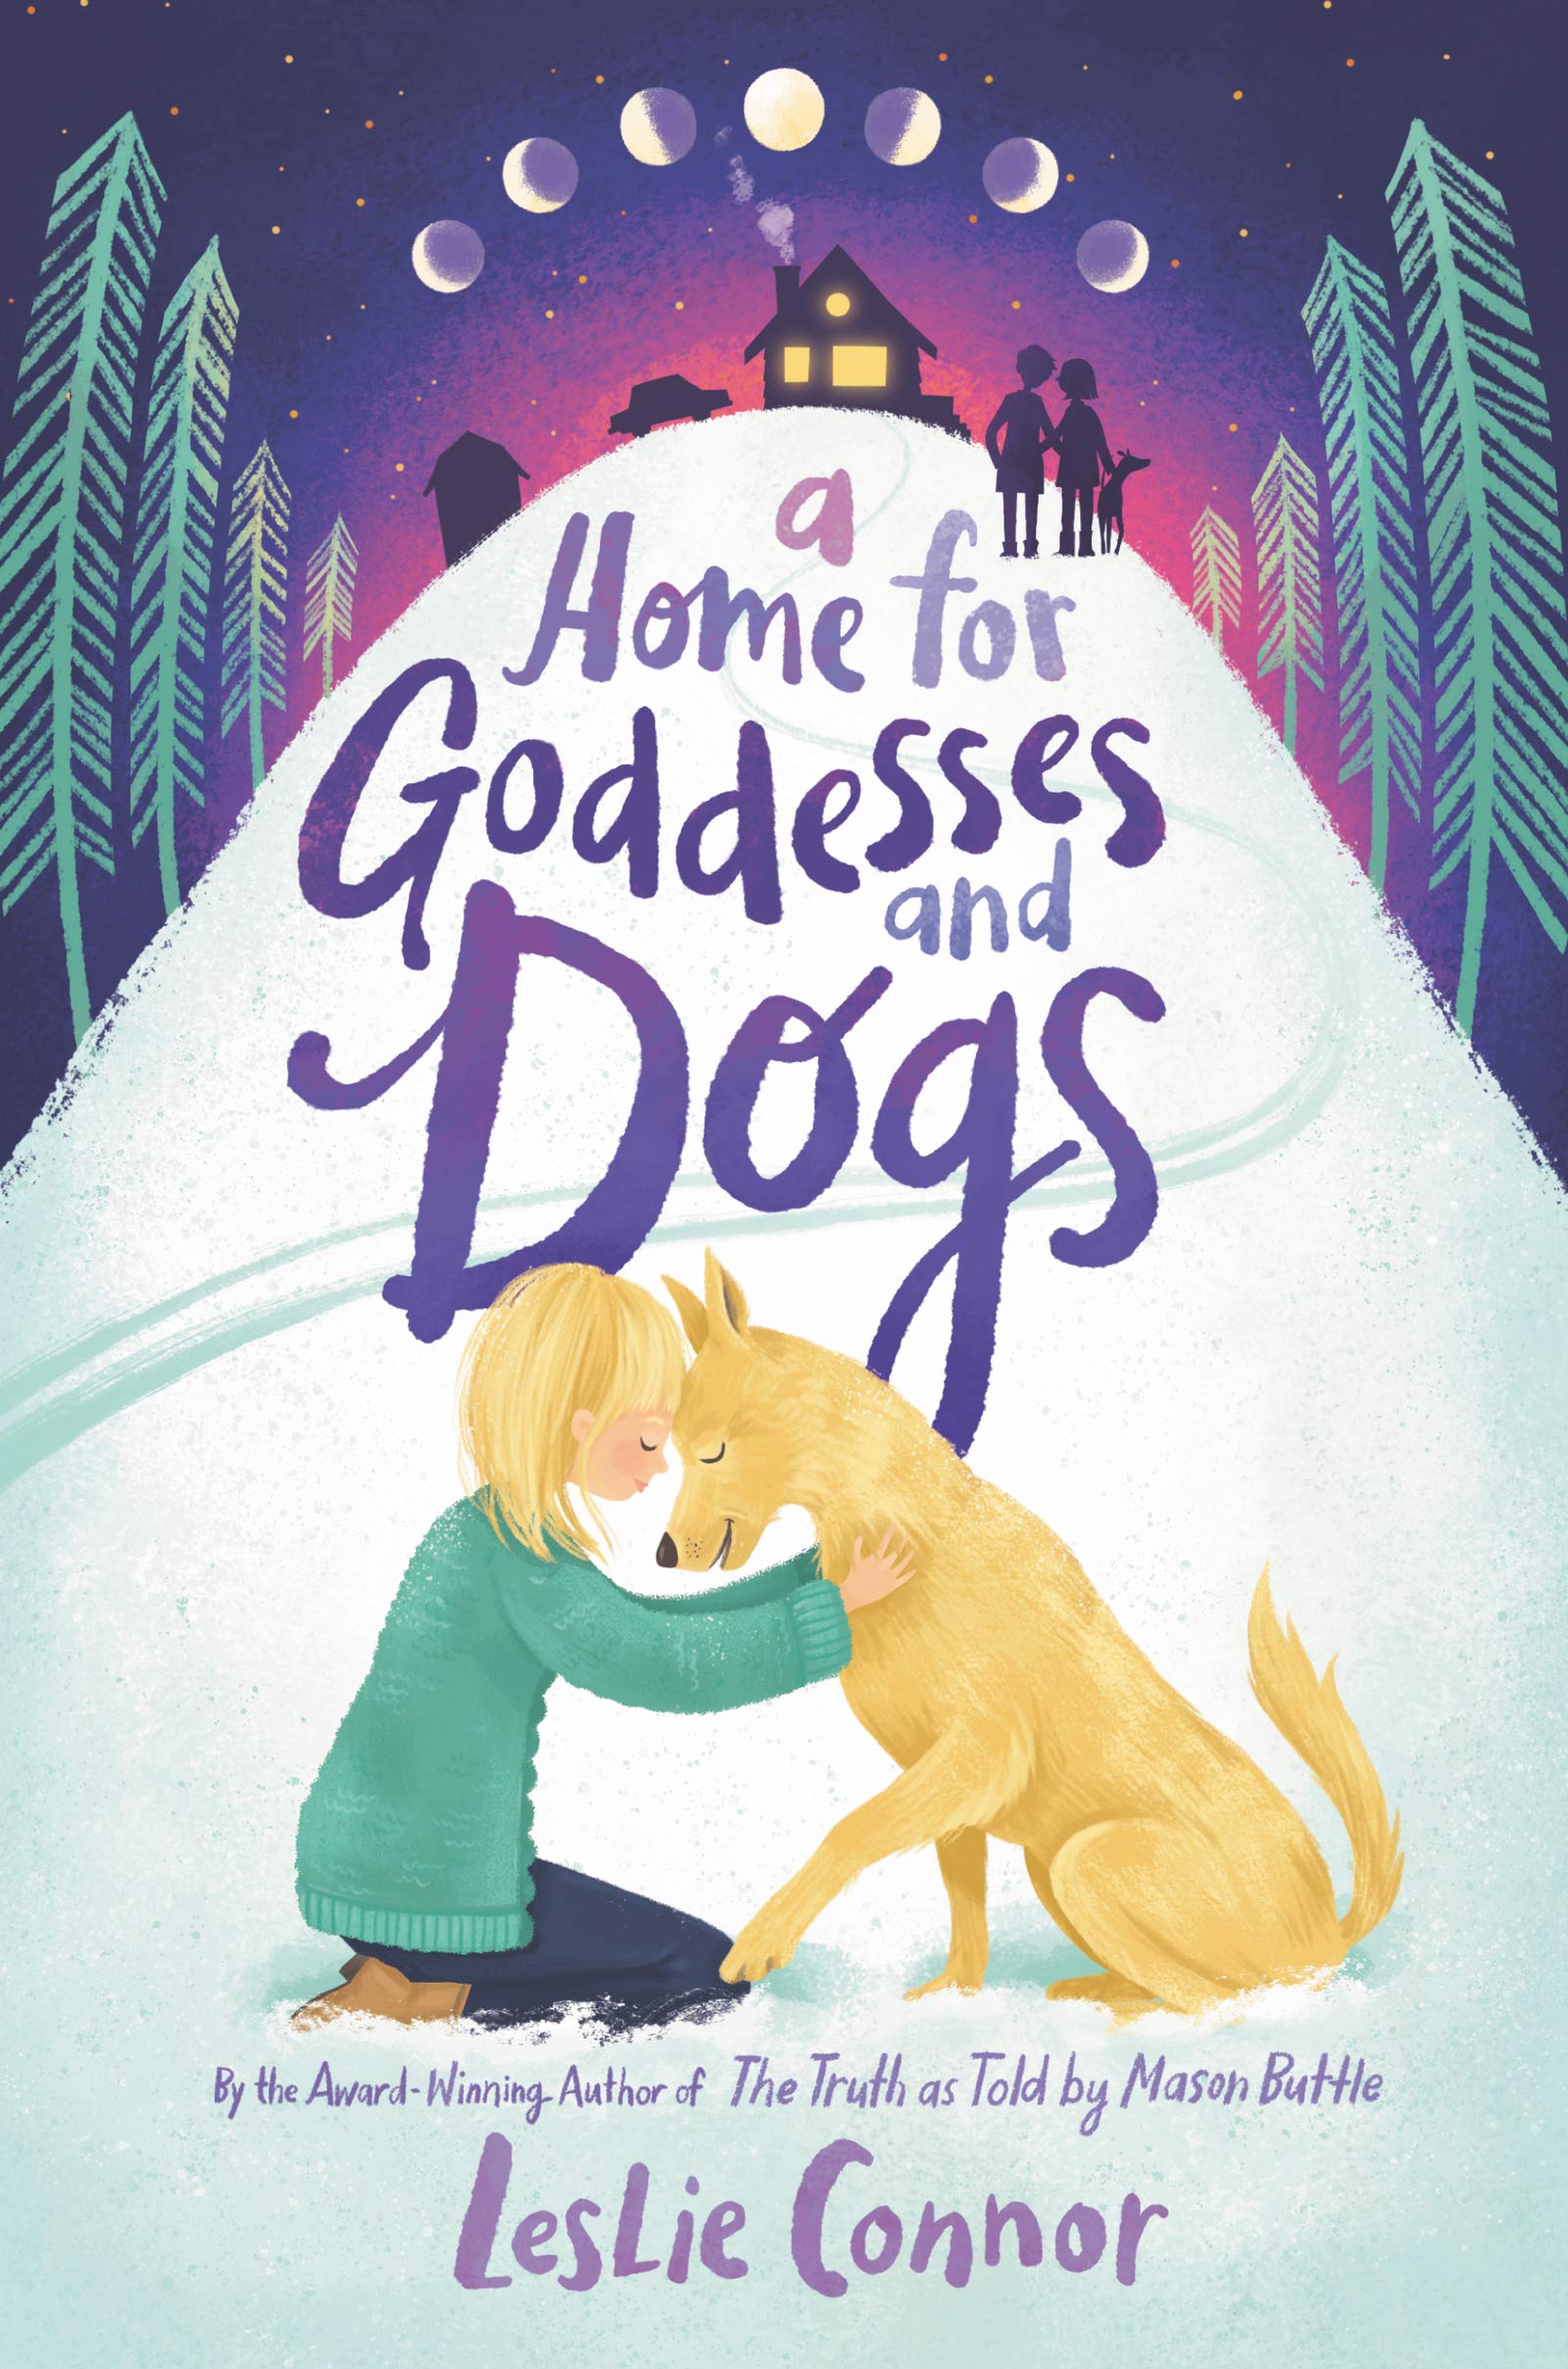 Cover Image for "A Home for Goddesses and Dogs"